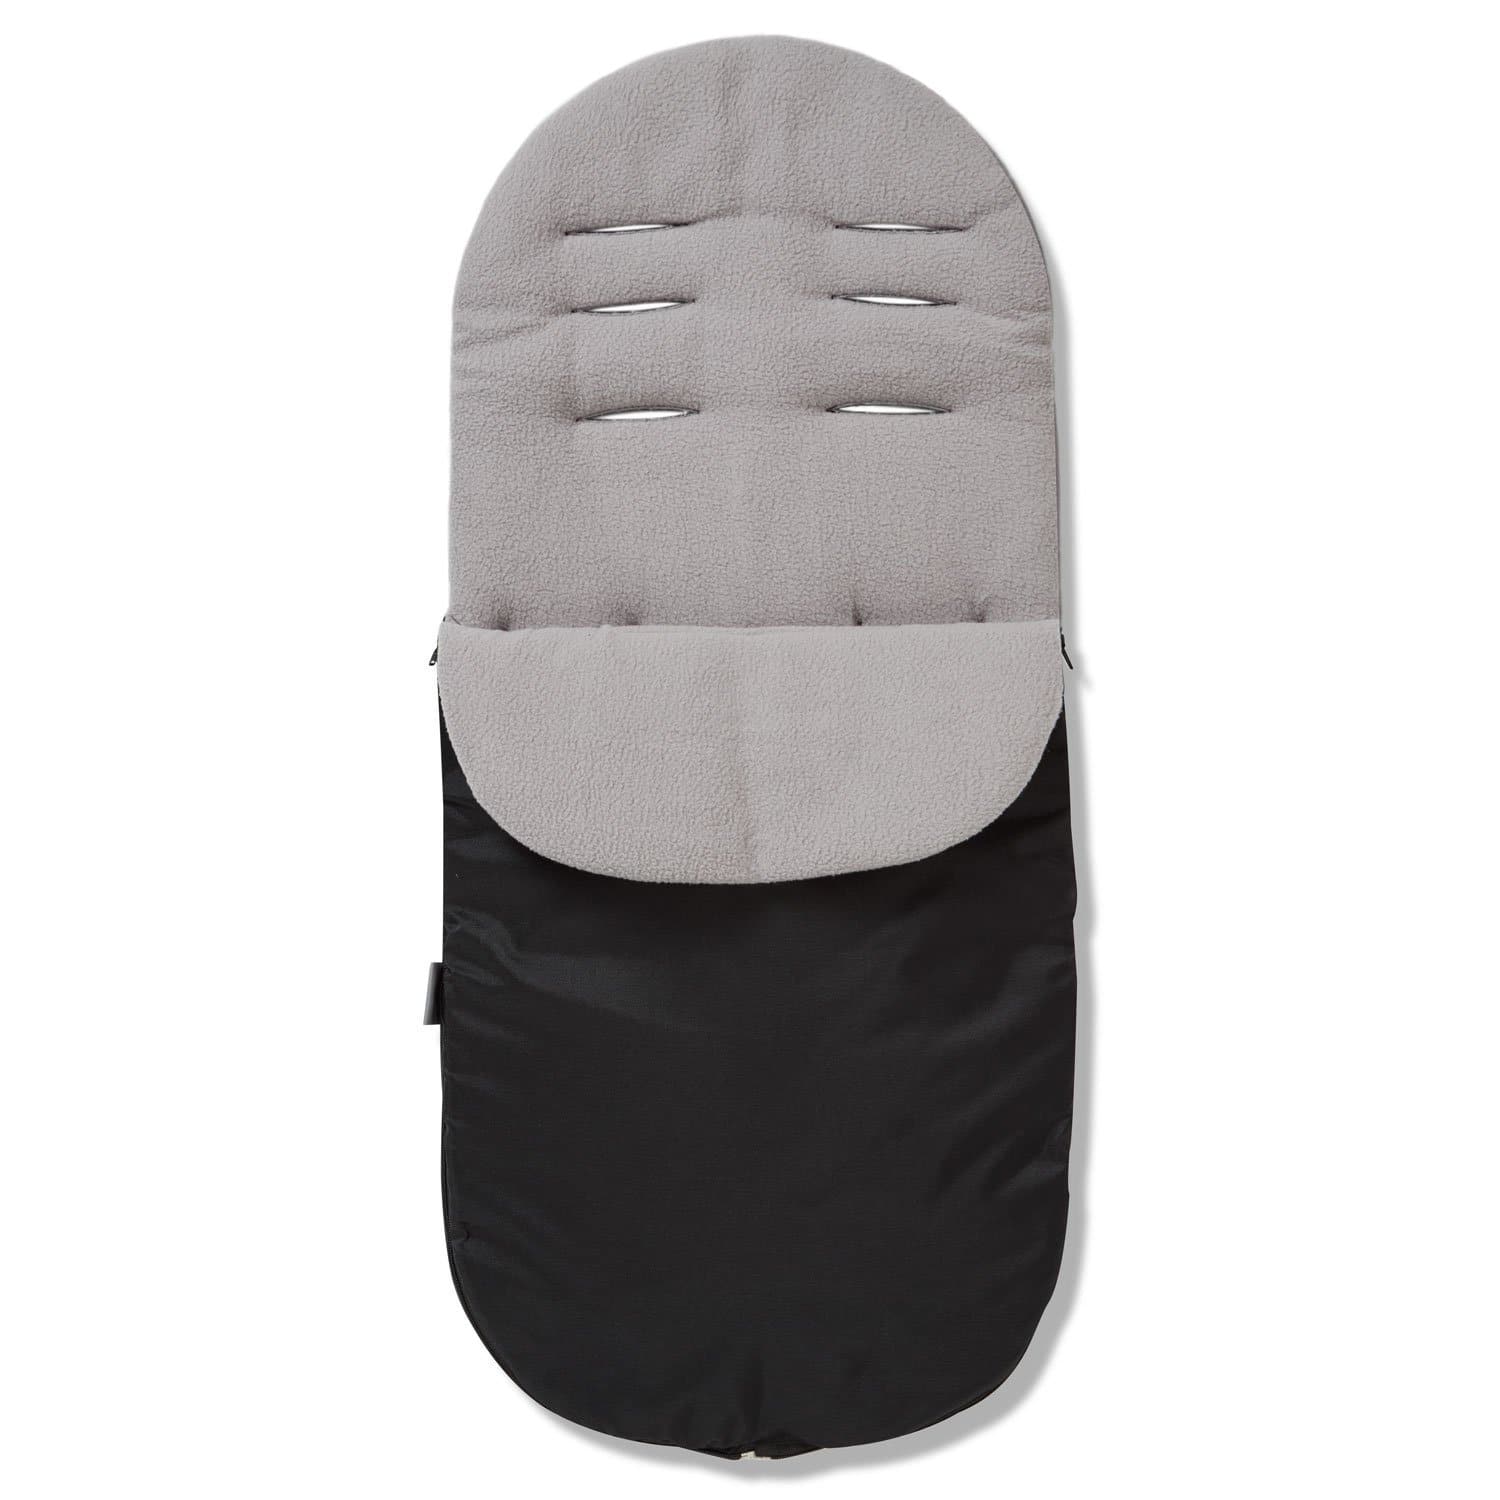 Footmuff / Cosy Toes Compatible with Hartan - Grey / Fits All Models | For Your Little One